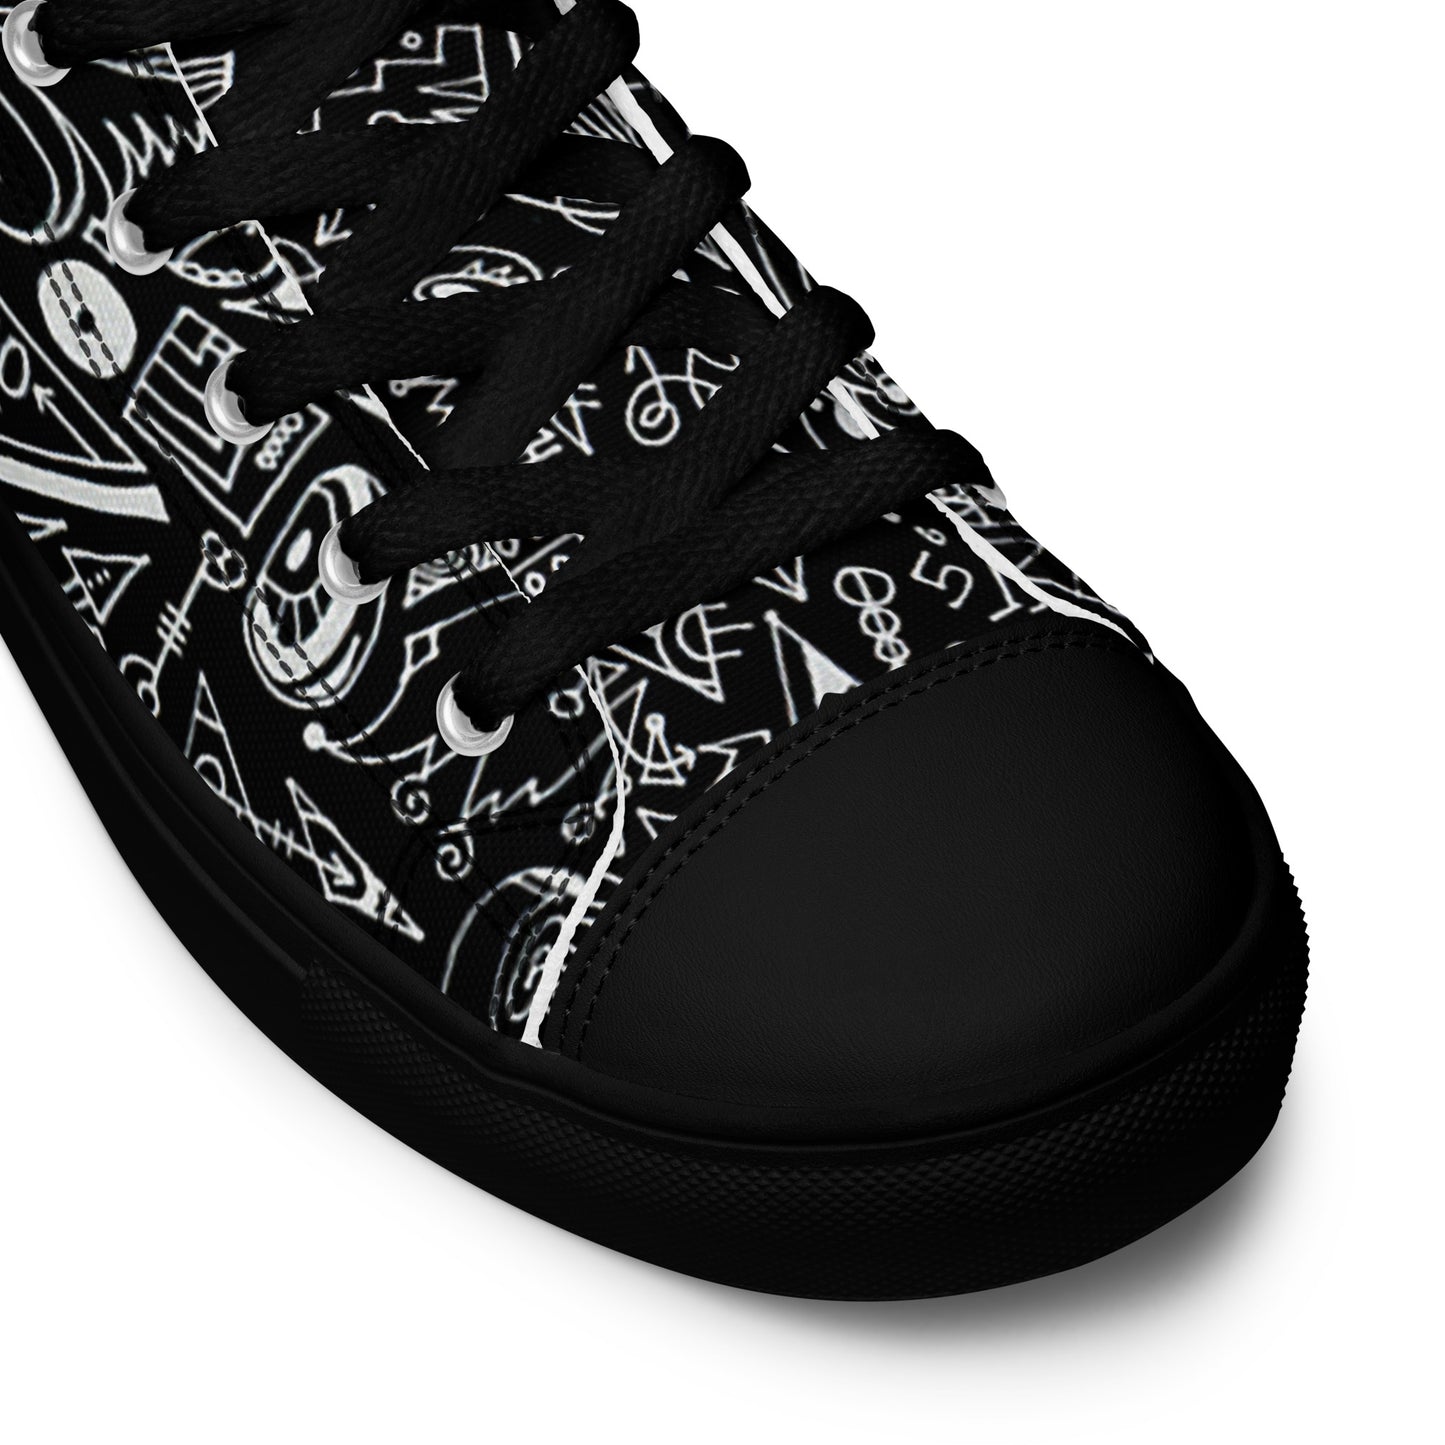 Men’s INVERTED "Dream Schematic #1" high top canvas shoes